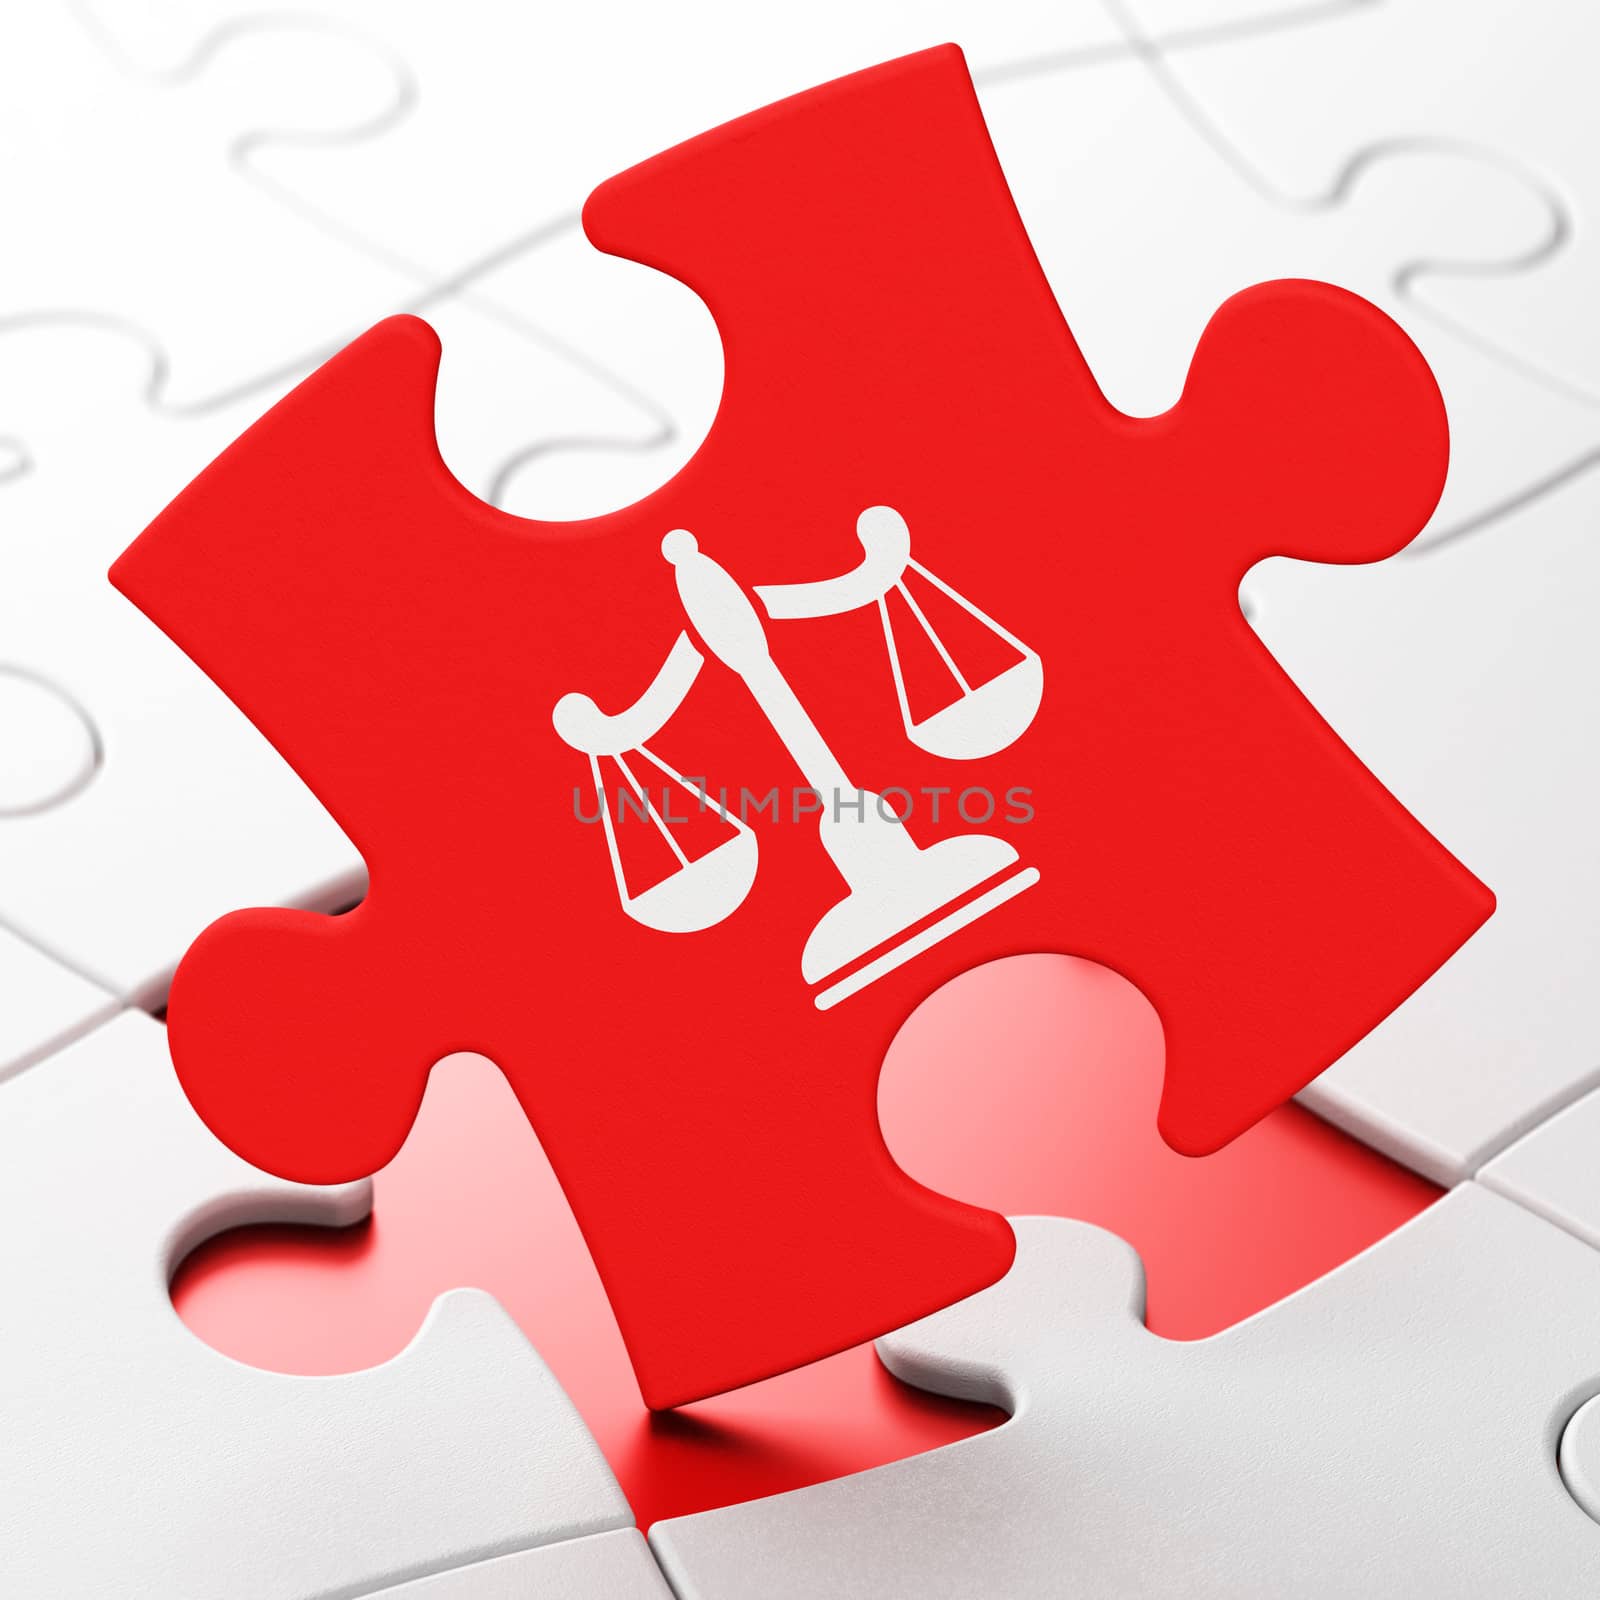 Law concept: Scales on Red puzzle pieces background, 3d render